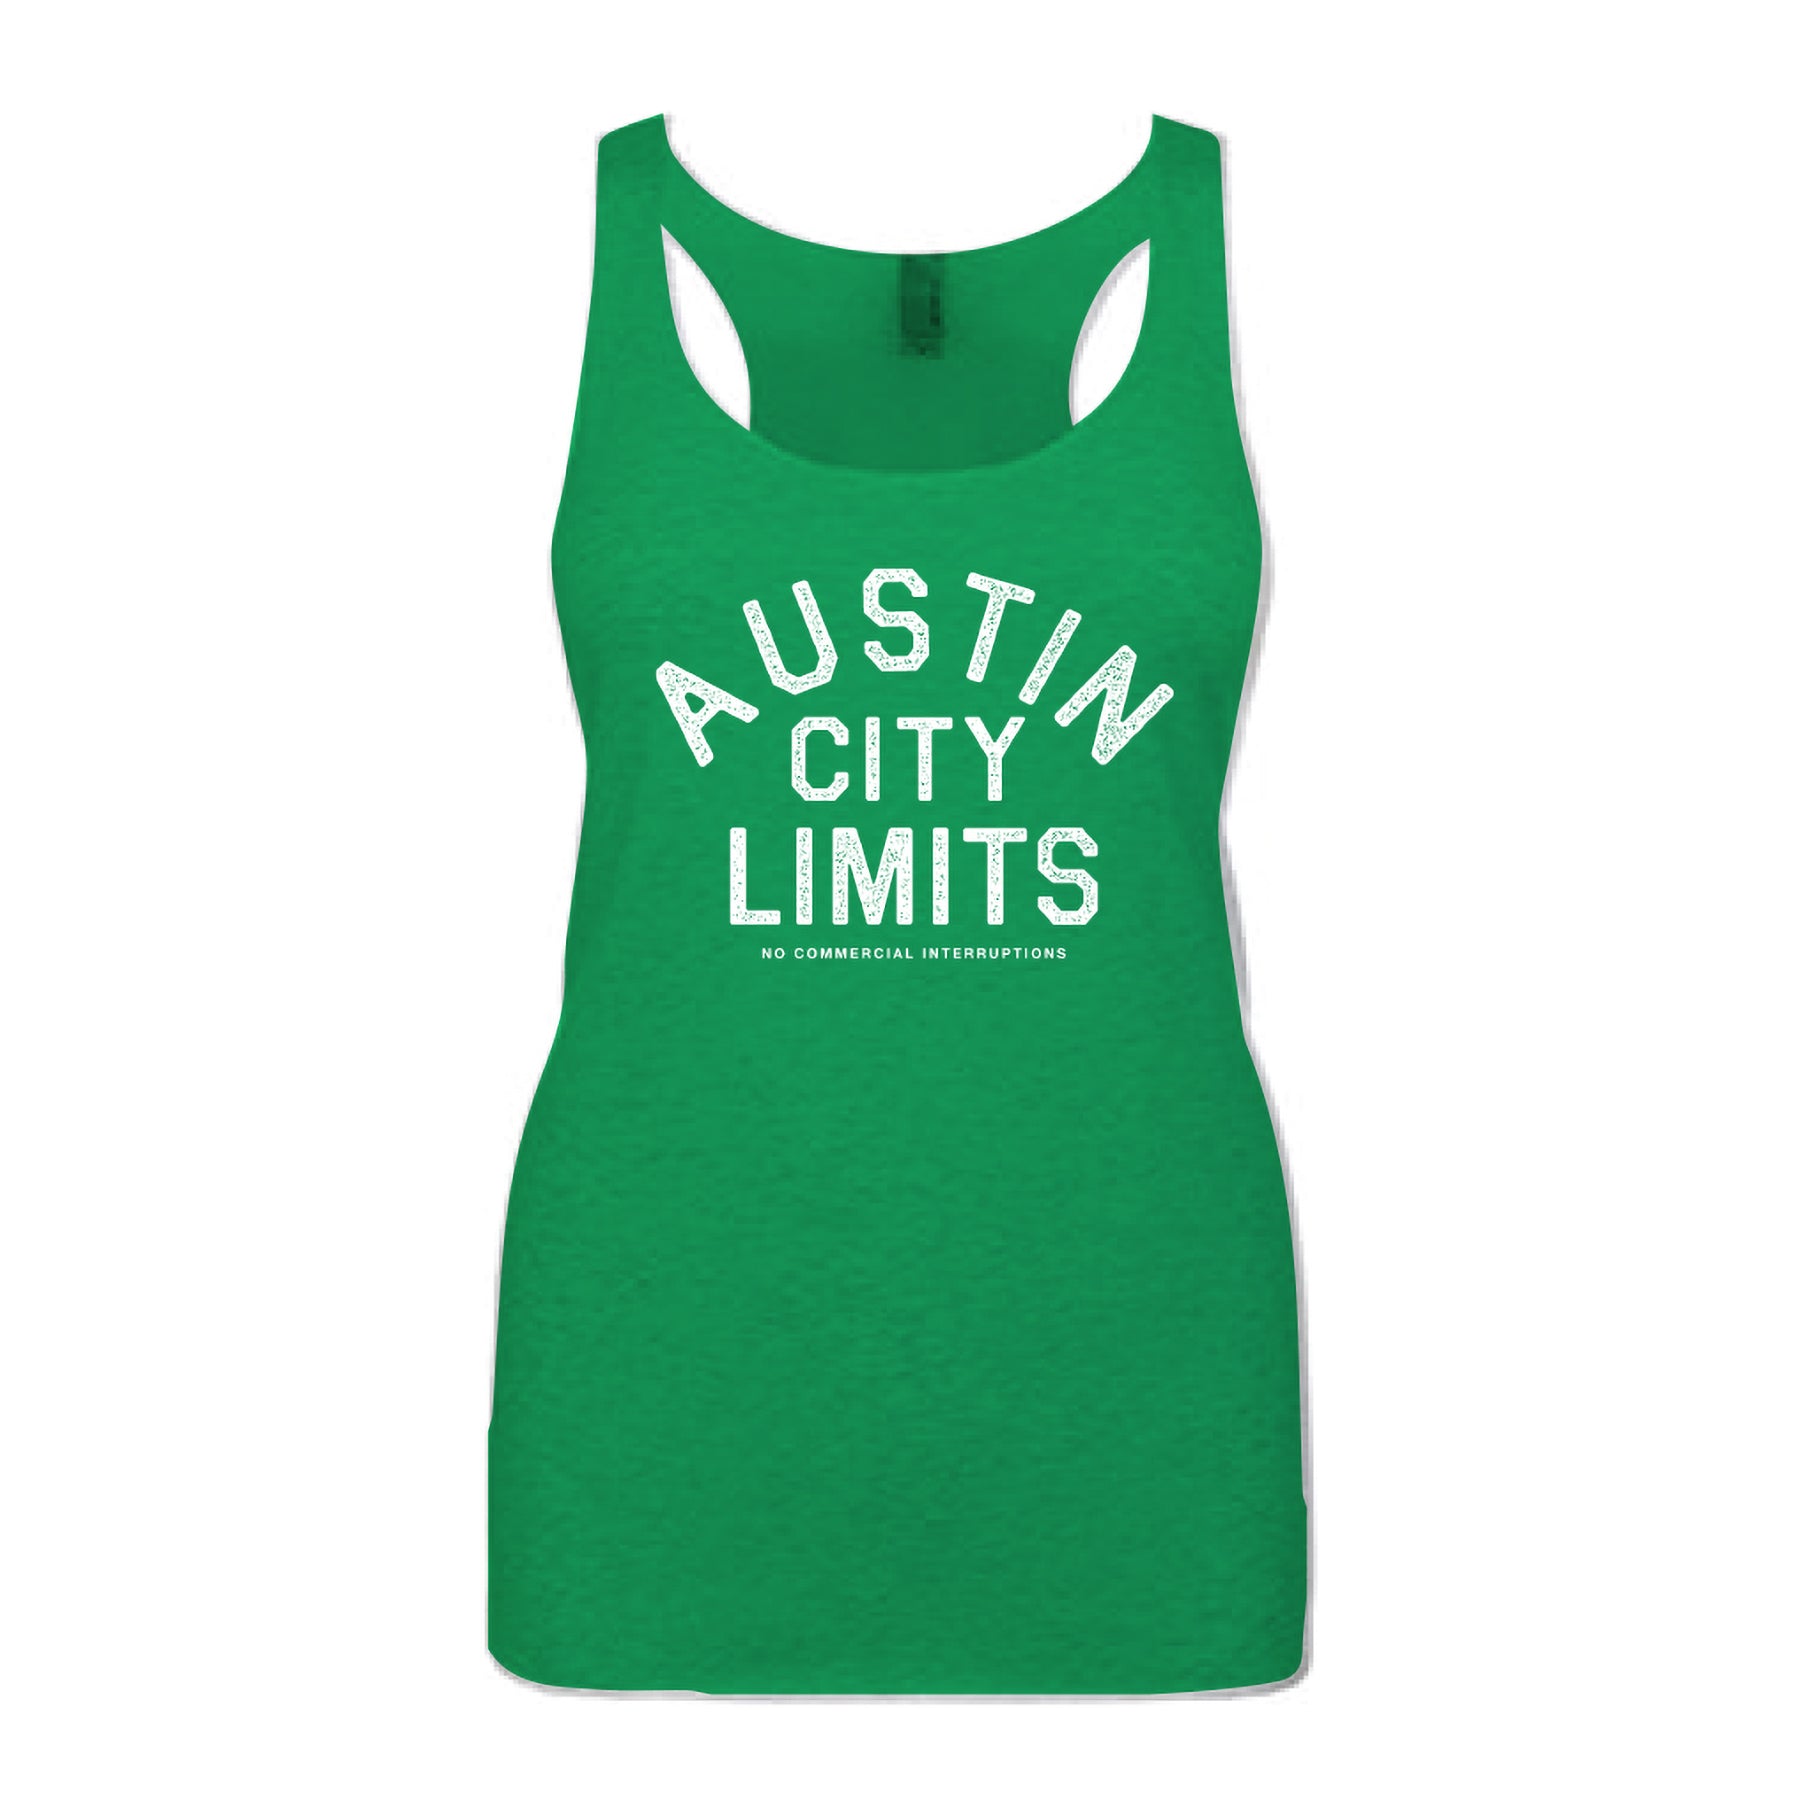 Green Women's Racerback Tank with White ACL Arch Logo